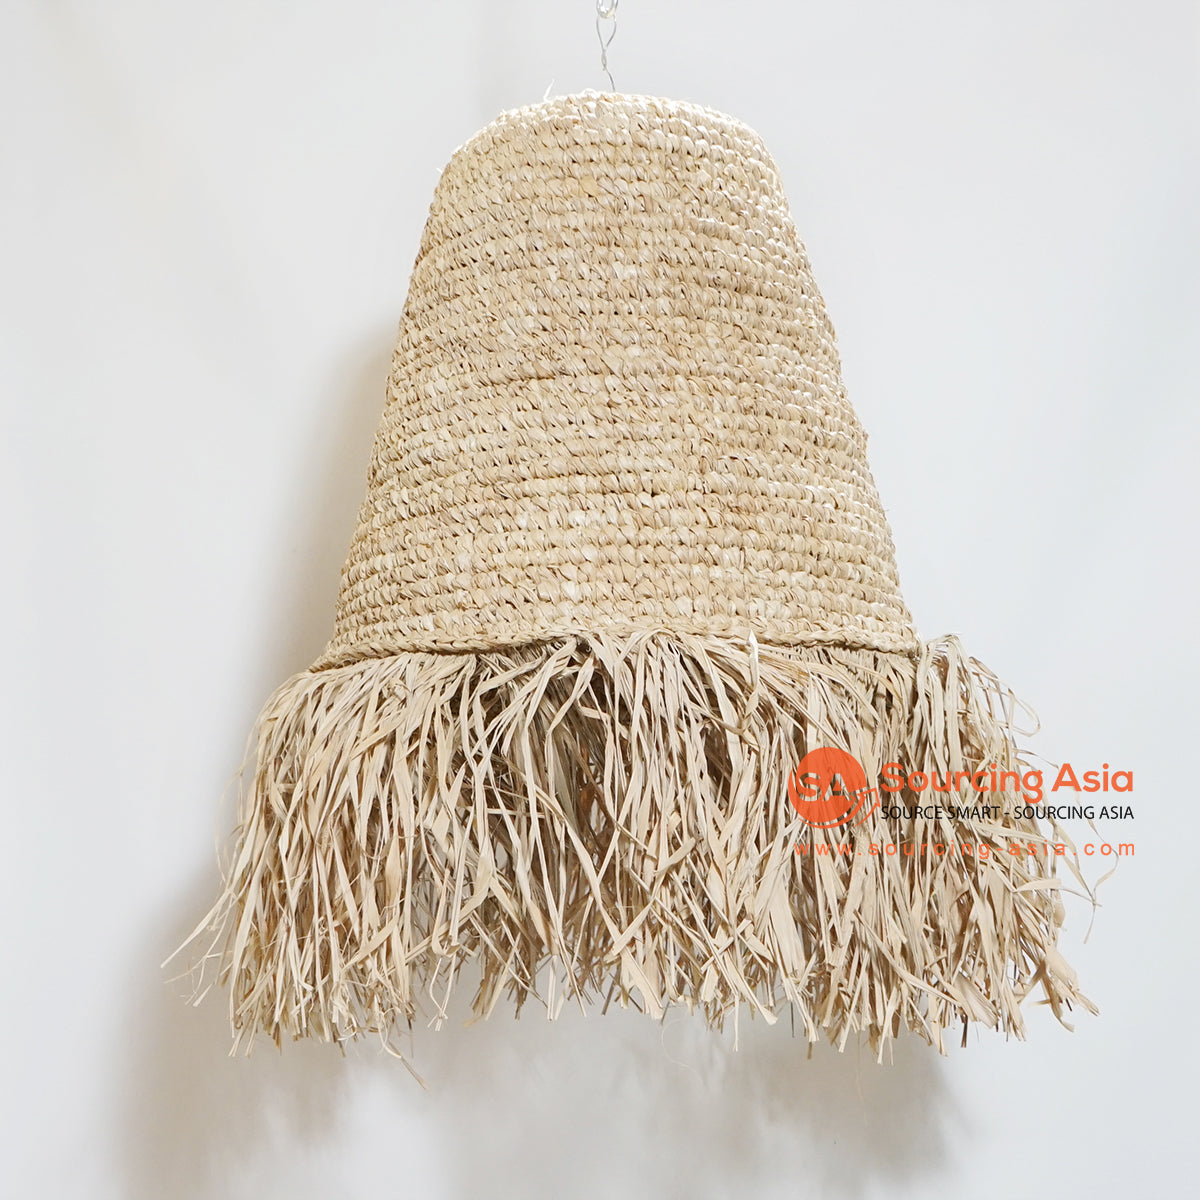 HBSC200 NATURAL SEAGRASS PENDANT LAMP WITH FRINGE